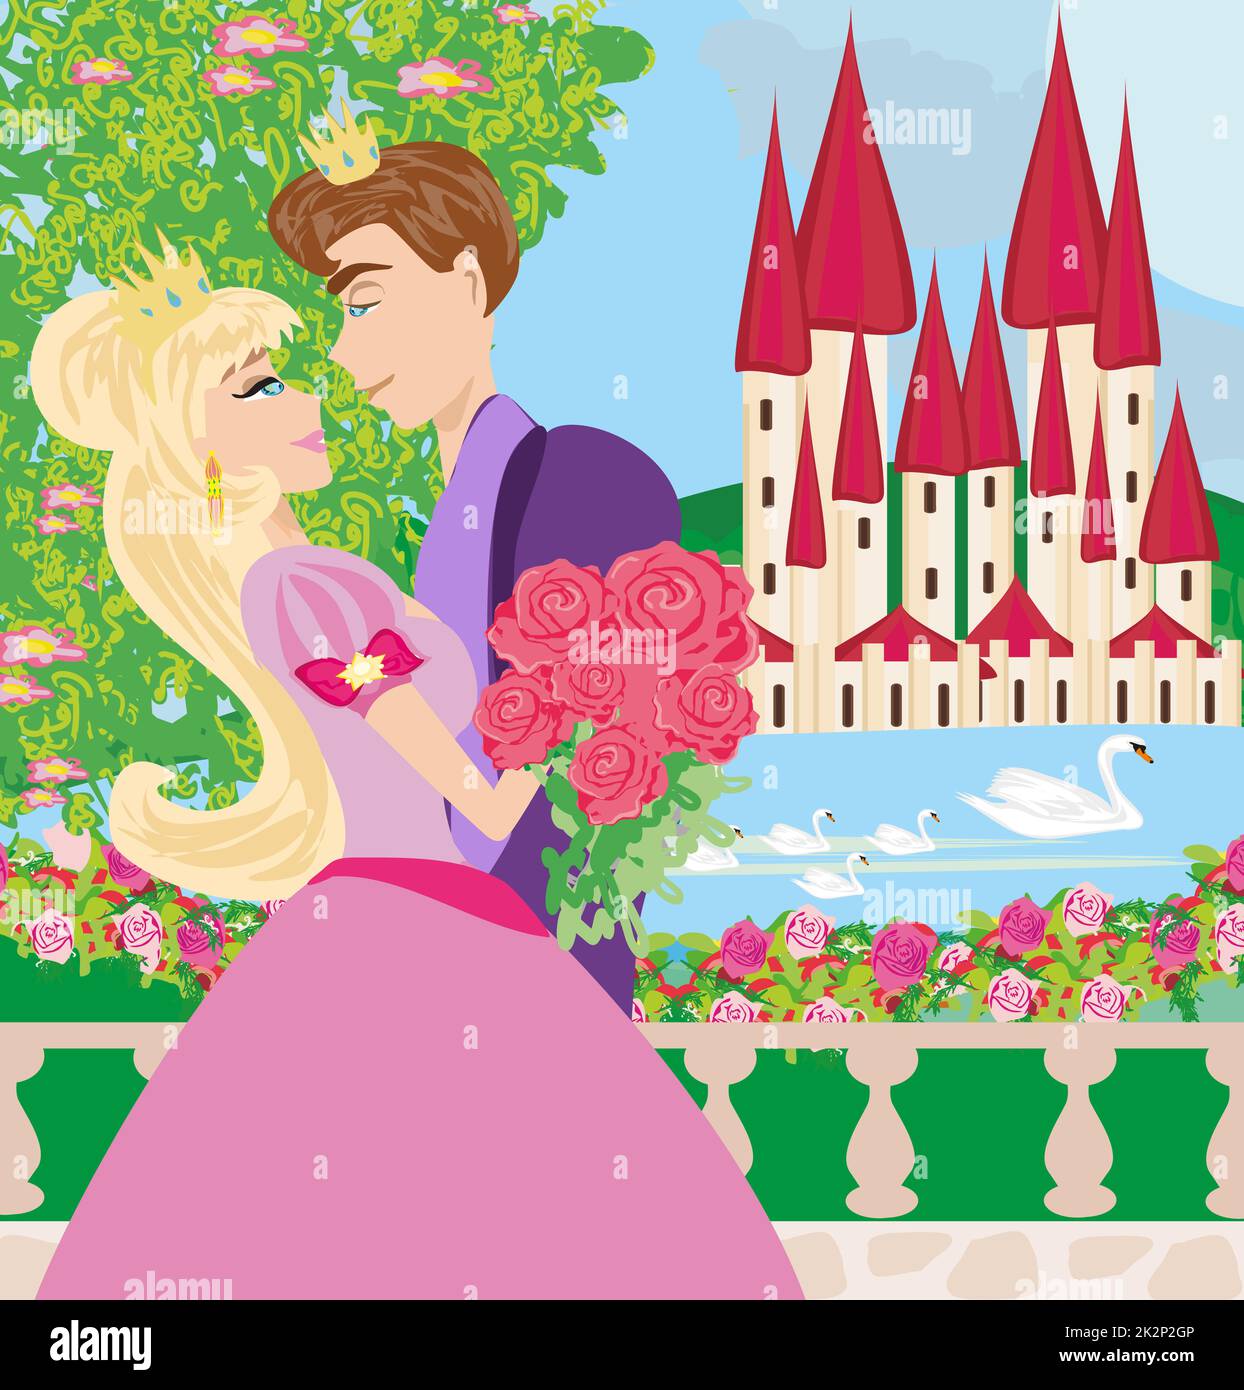 princess with prince kissing in the garden Stock Photo